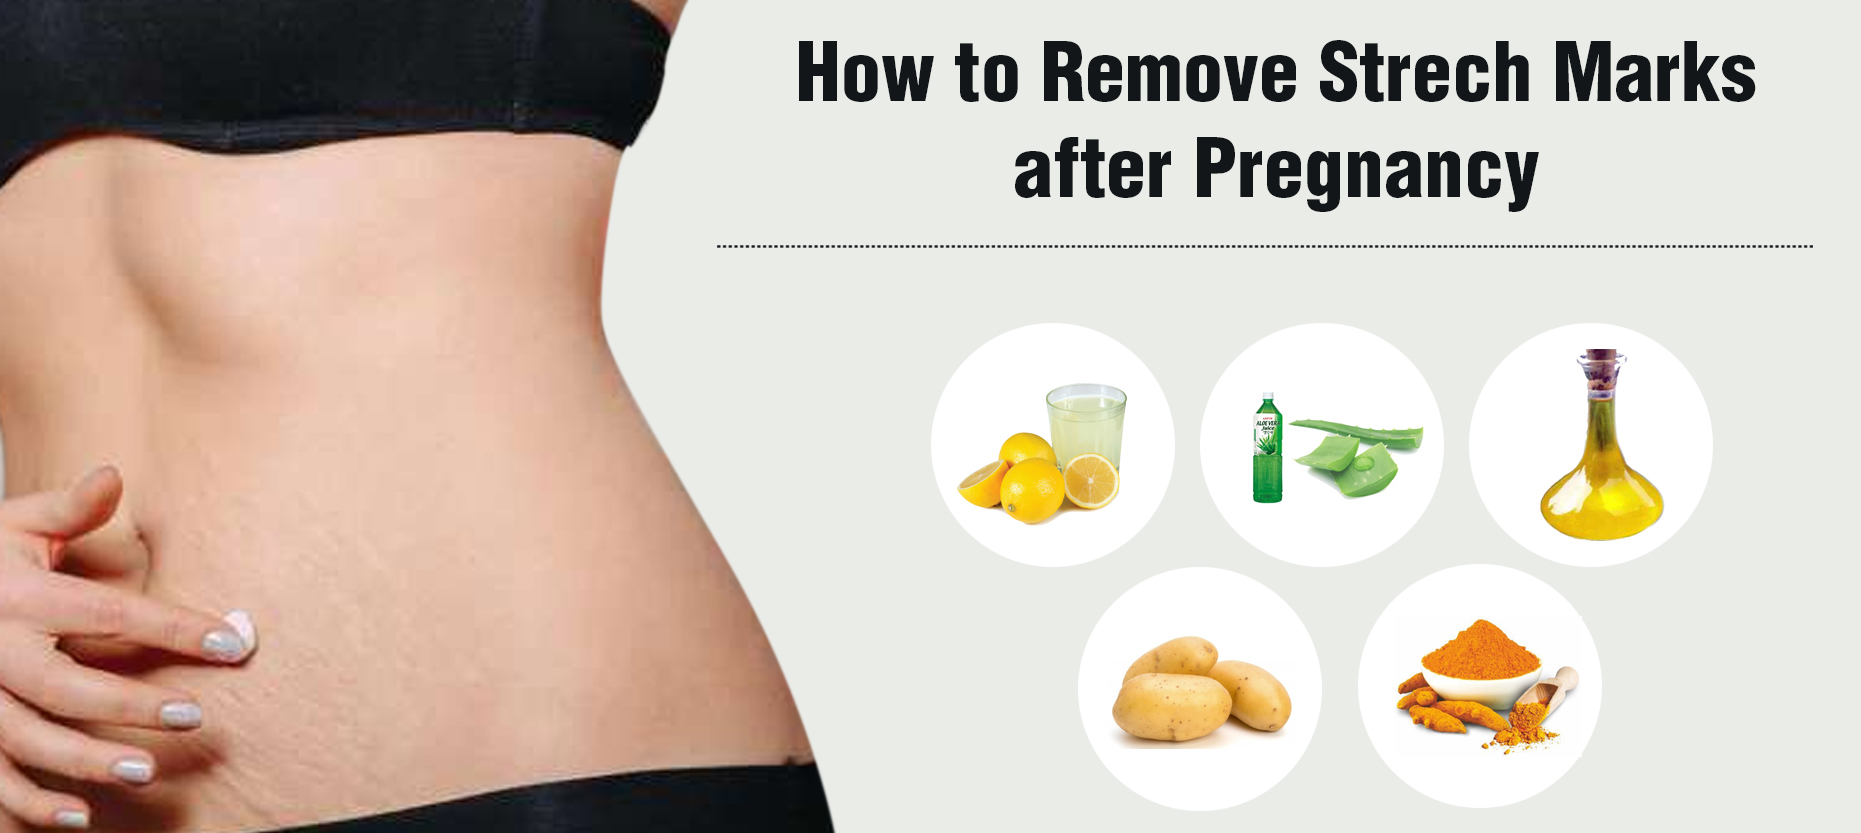 How to Remove Stretch Marks after Pregnancy